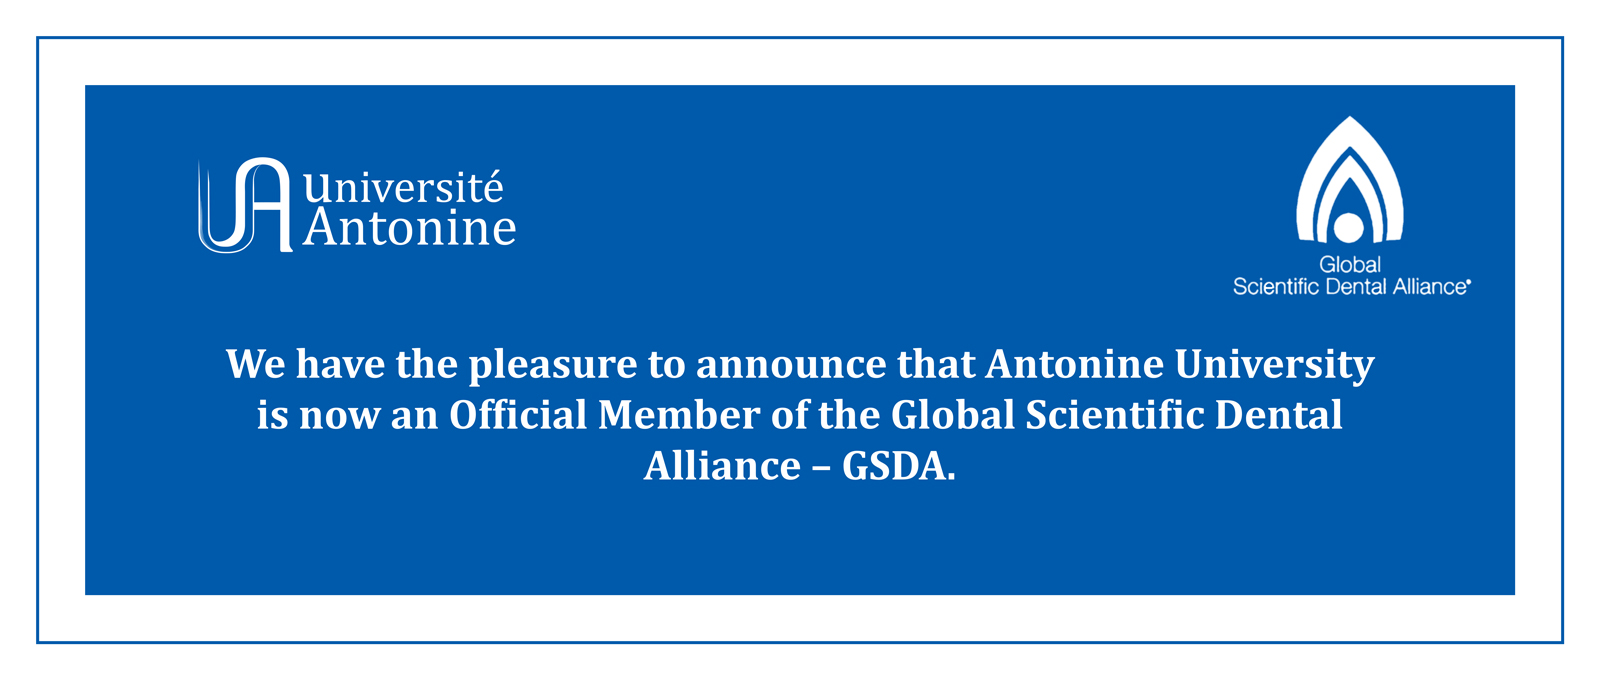 Antonine University is now an Official Member of the Global Scientific Dental Alliance – GSDA